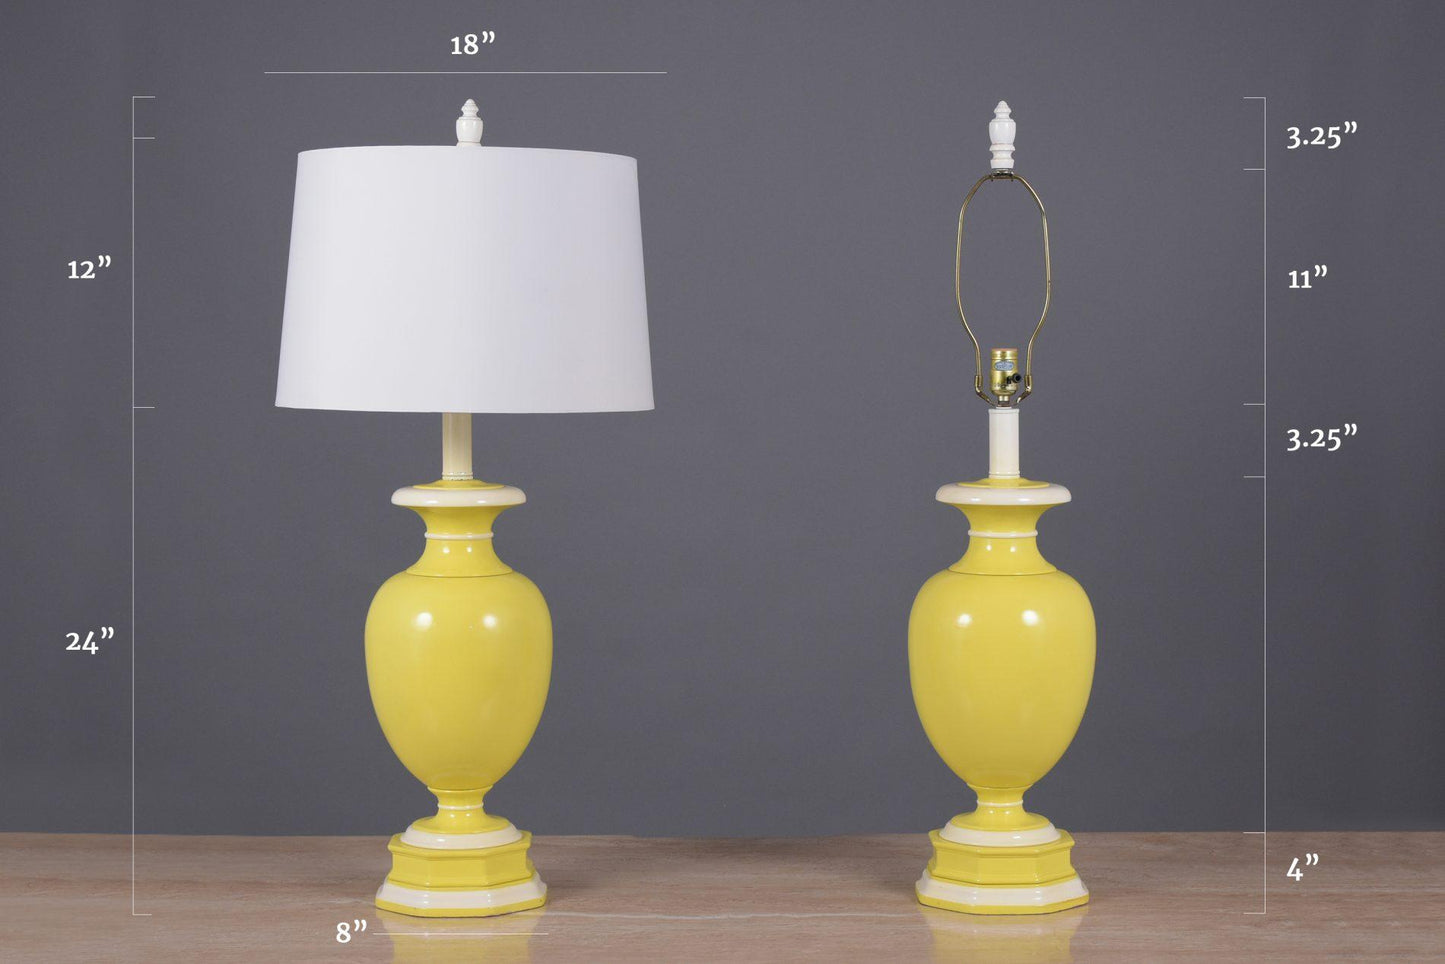 Neoclassical Style Vintage Ceramic Table Lamps in Yellow & White with New Shades - U.S Wired